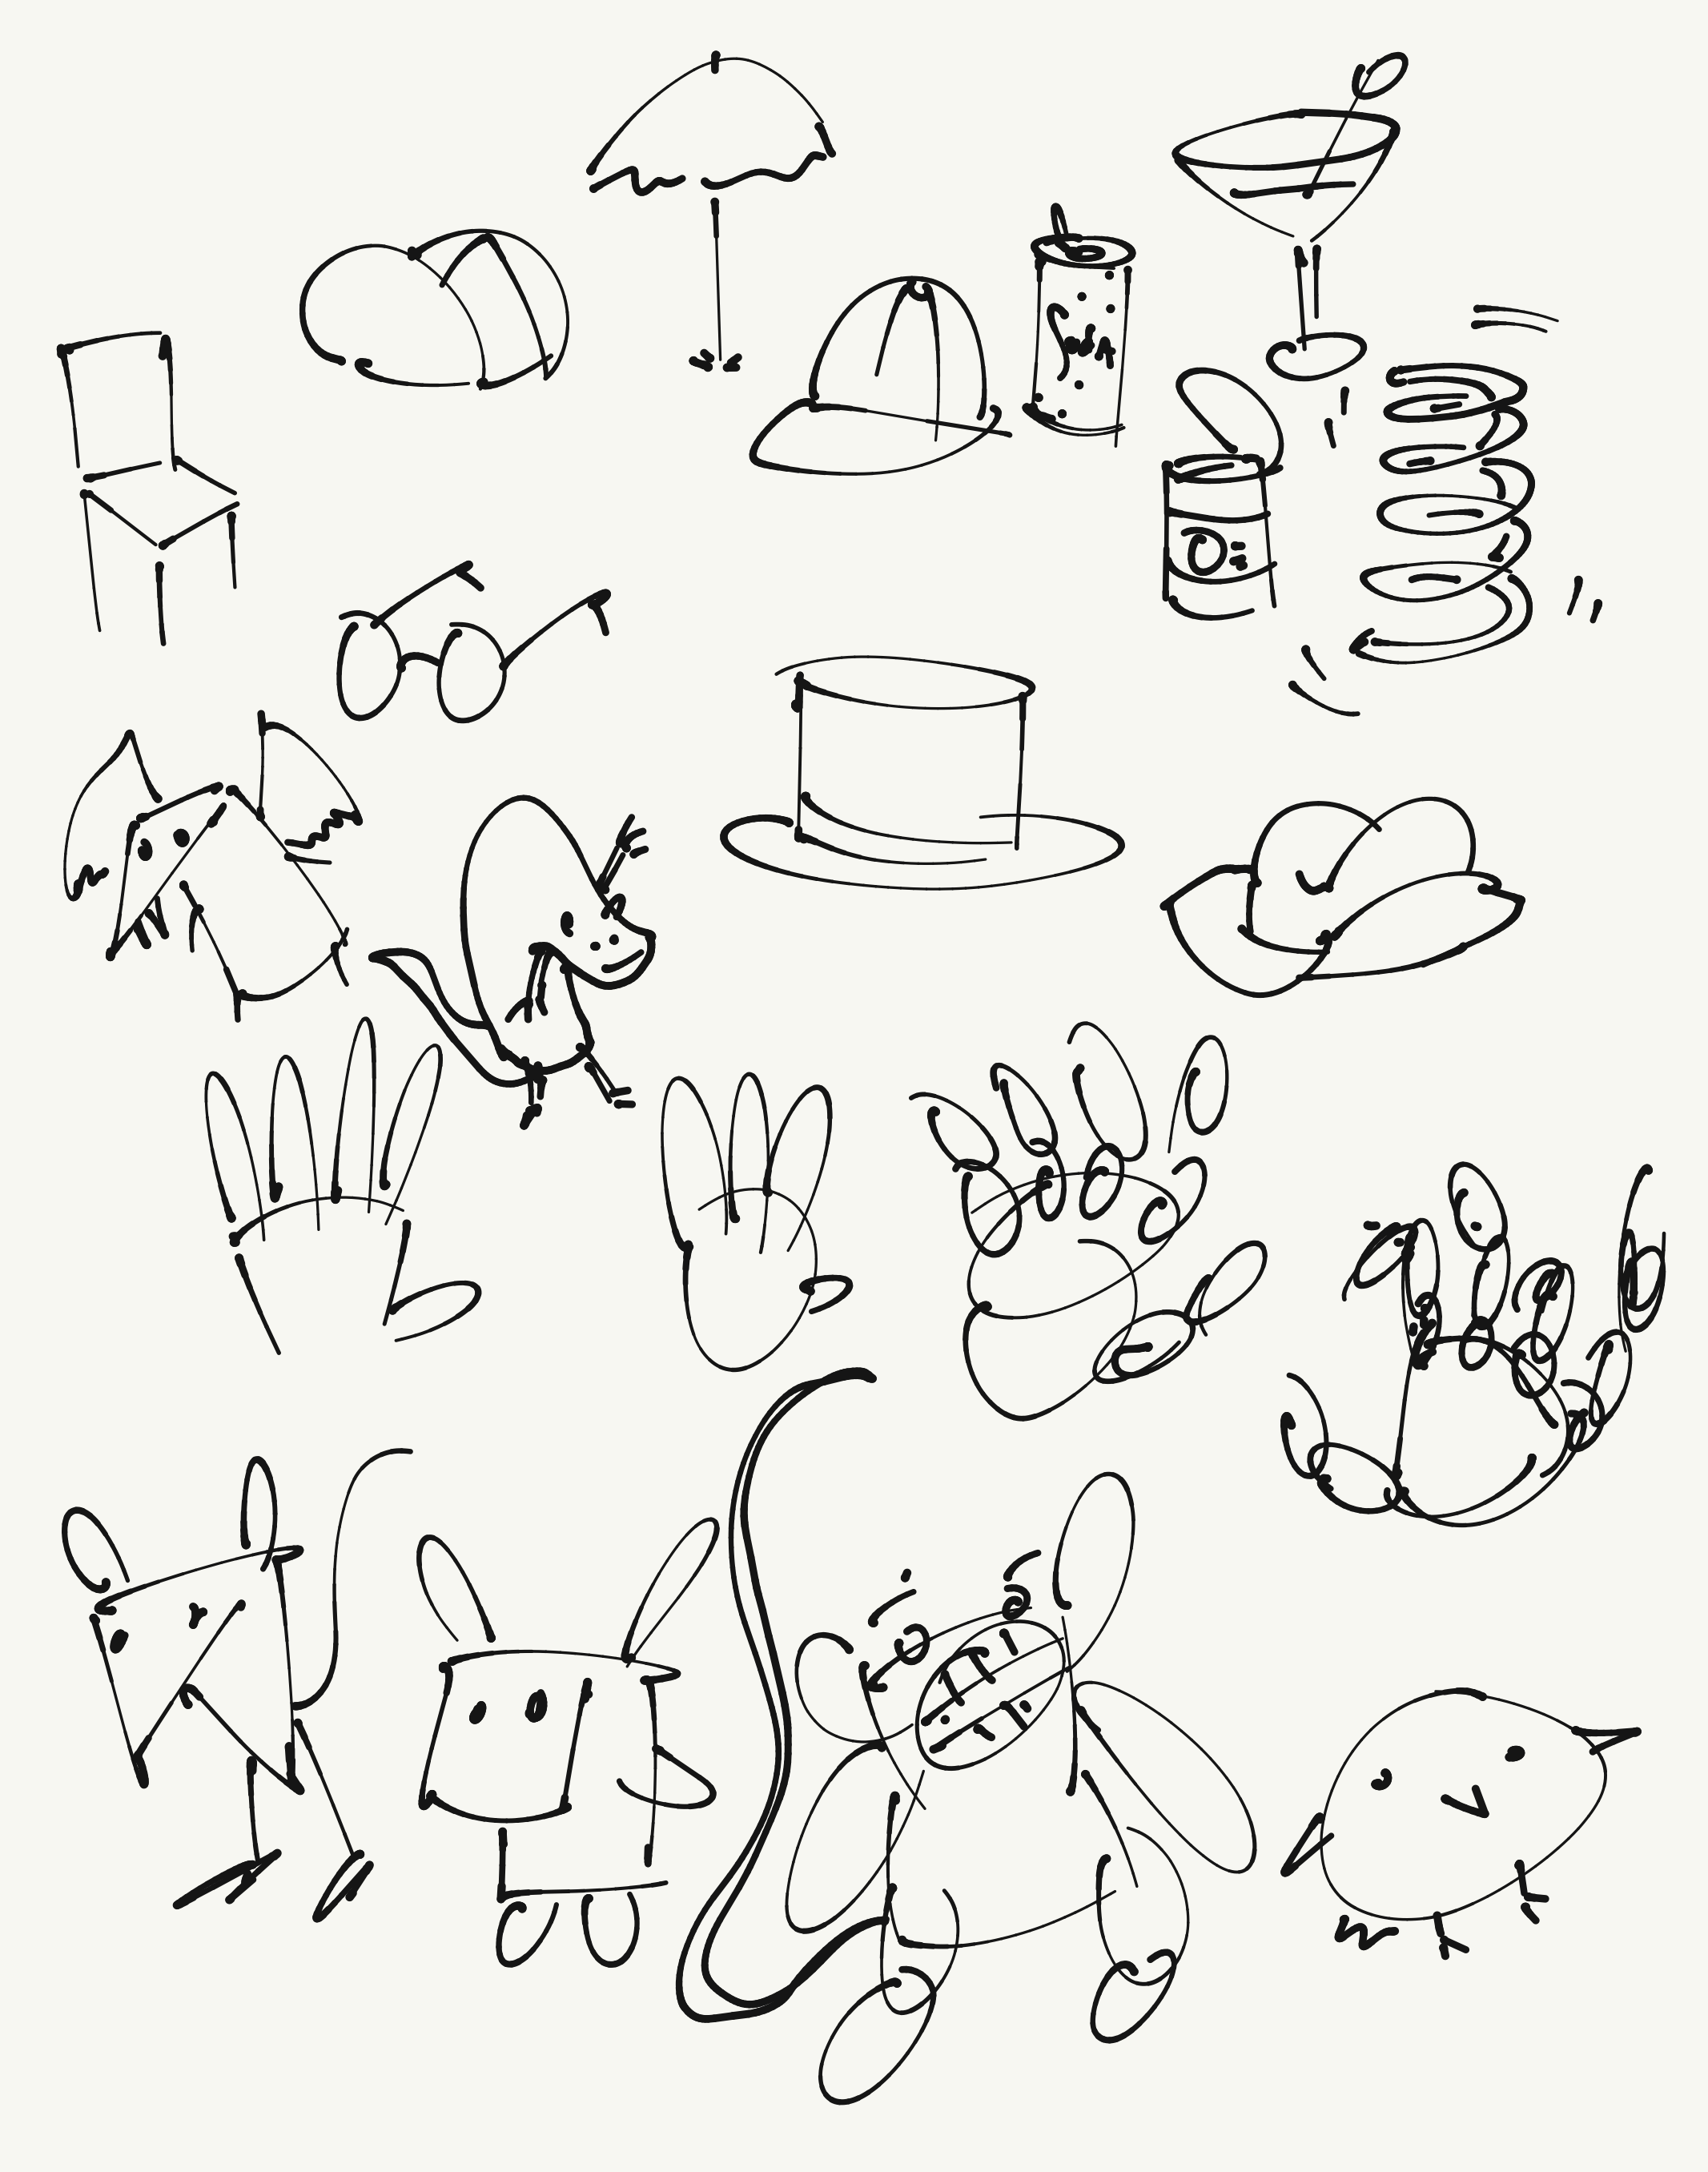 Doodle Catalog 3 - lots of sketches drawings quick visual storytelling note taking examples and ideas 7.png